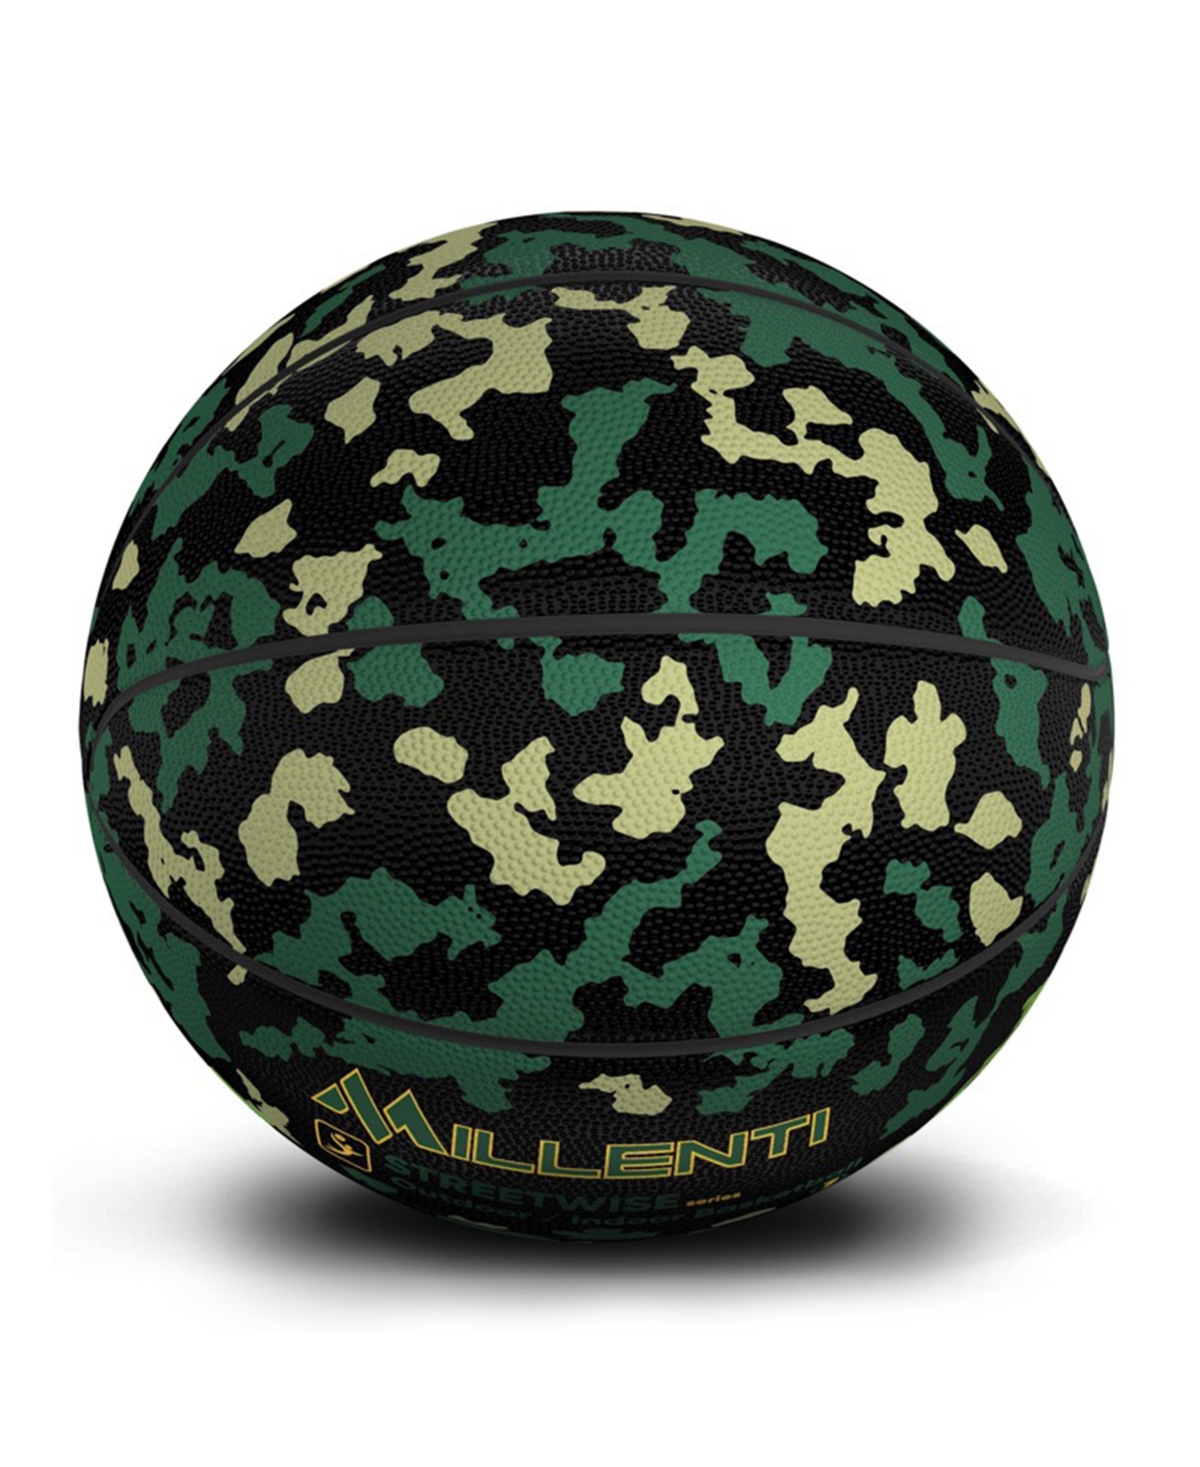 Millenti Basketball Official Size 7 Outdoor Indoor Ball Street Wise Adult Sized Basketball For Men And Women In Green